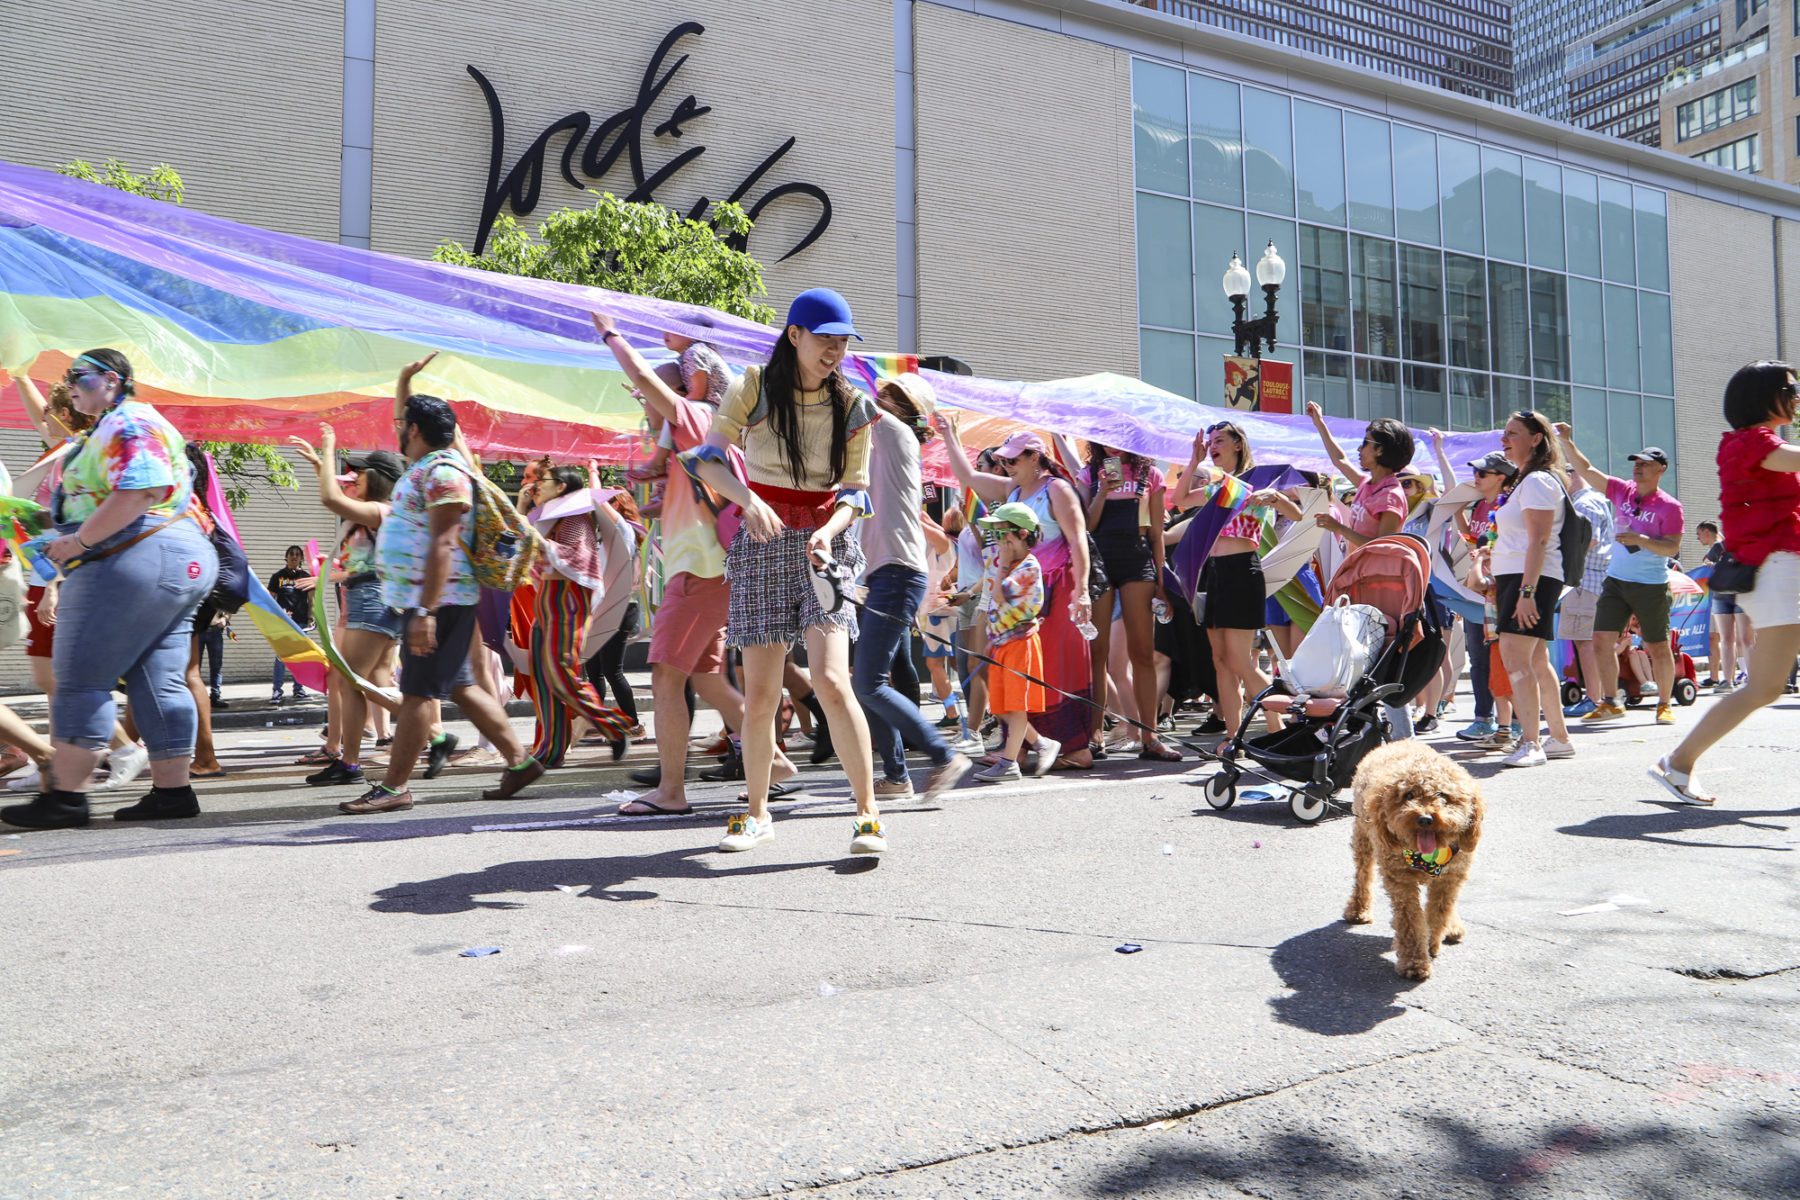 People gathered under a large pride flag, in the foreground a dog on a lease joins the parade